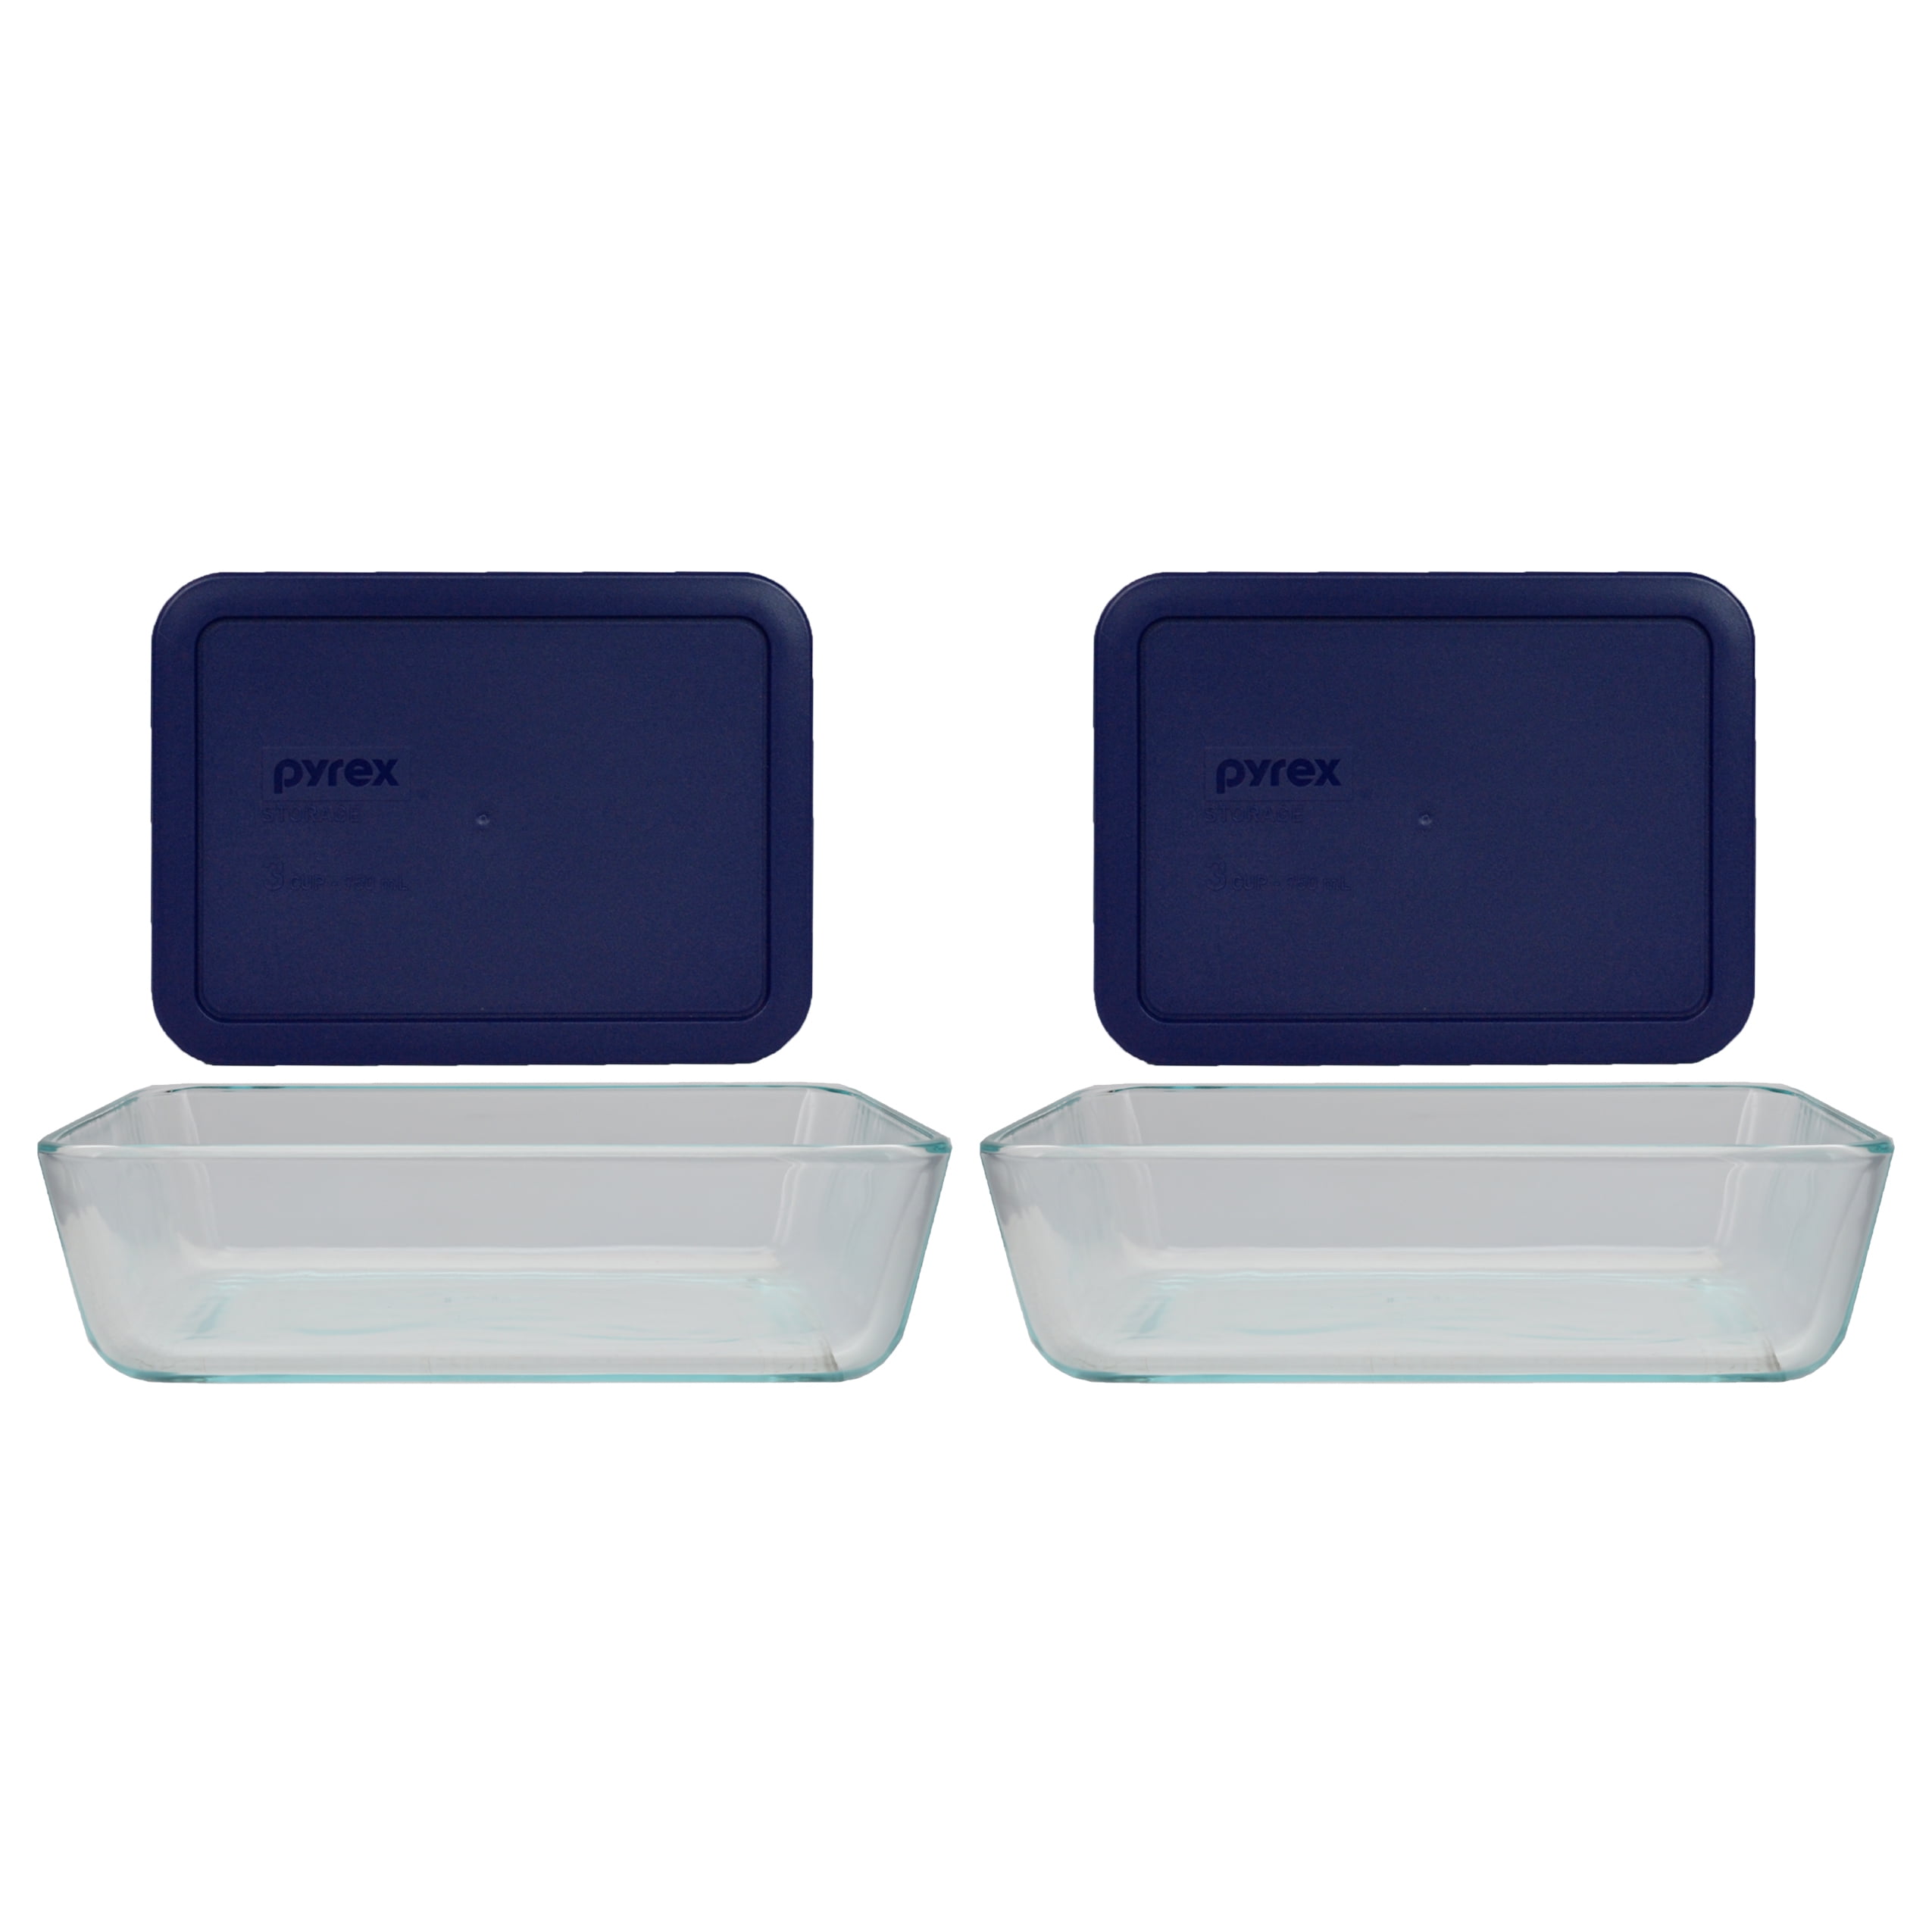 Pyrex Rectangular 6 Cup Storage Lid Cover Dark Blue 7211-PC New for Glass Dish 